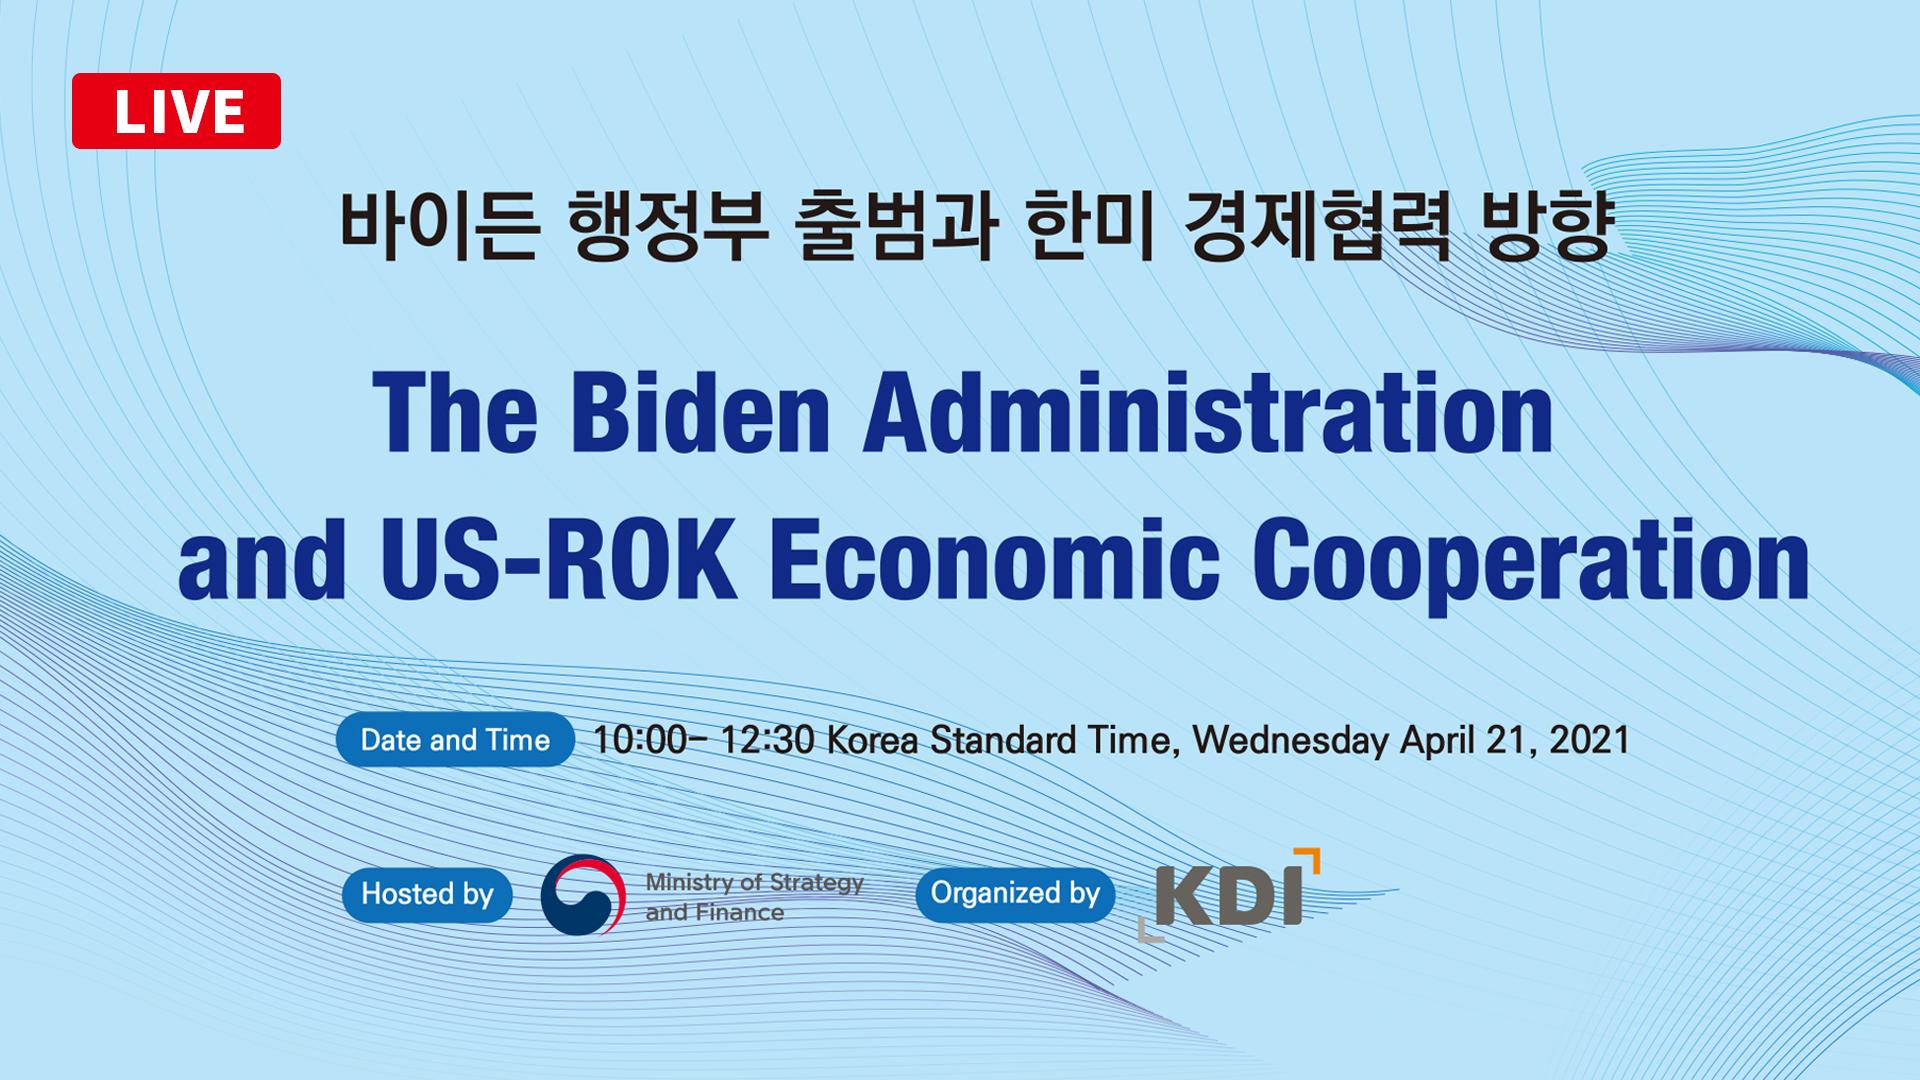 LIVE 바이든 행정부 출범과 한미 경제협력 방향 The Biden Administration and US-ROK Economic Cooperation [Data and Time] 10:00 ~ 12:30 Korea Standard Time, Wednesday April 21, 2021 [Hosted by] Ministry of Strategy and Finance [Organized by] KDI